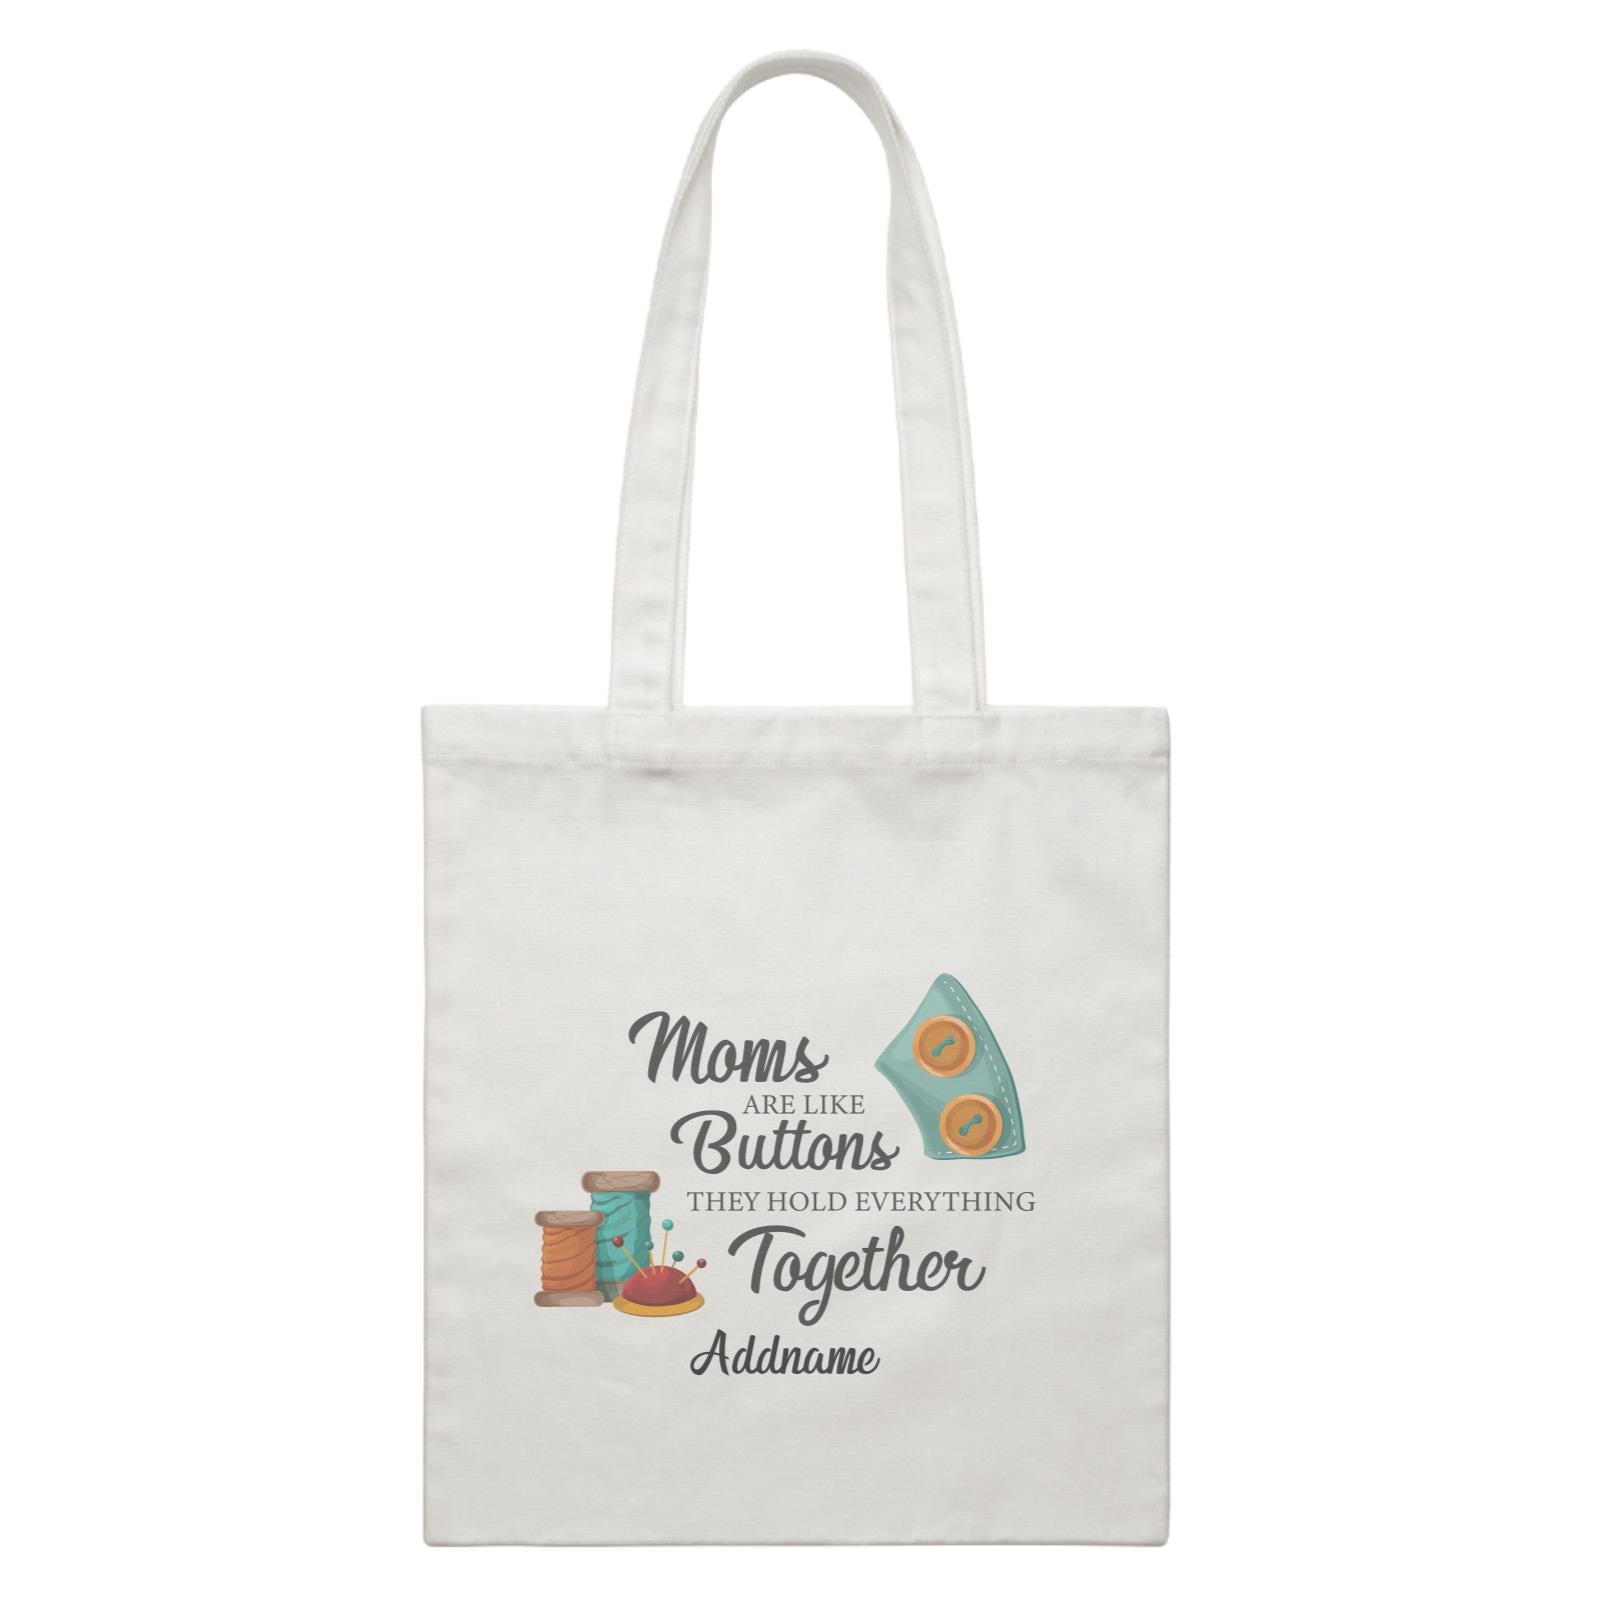 Sweet Mom Quotes 2 Moms Are Like Buttons They Hold Everything Together Addname Accessories White Canvas Bag